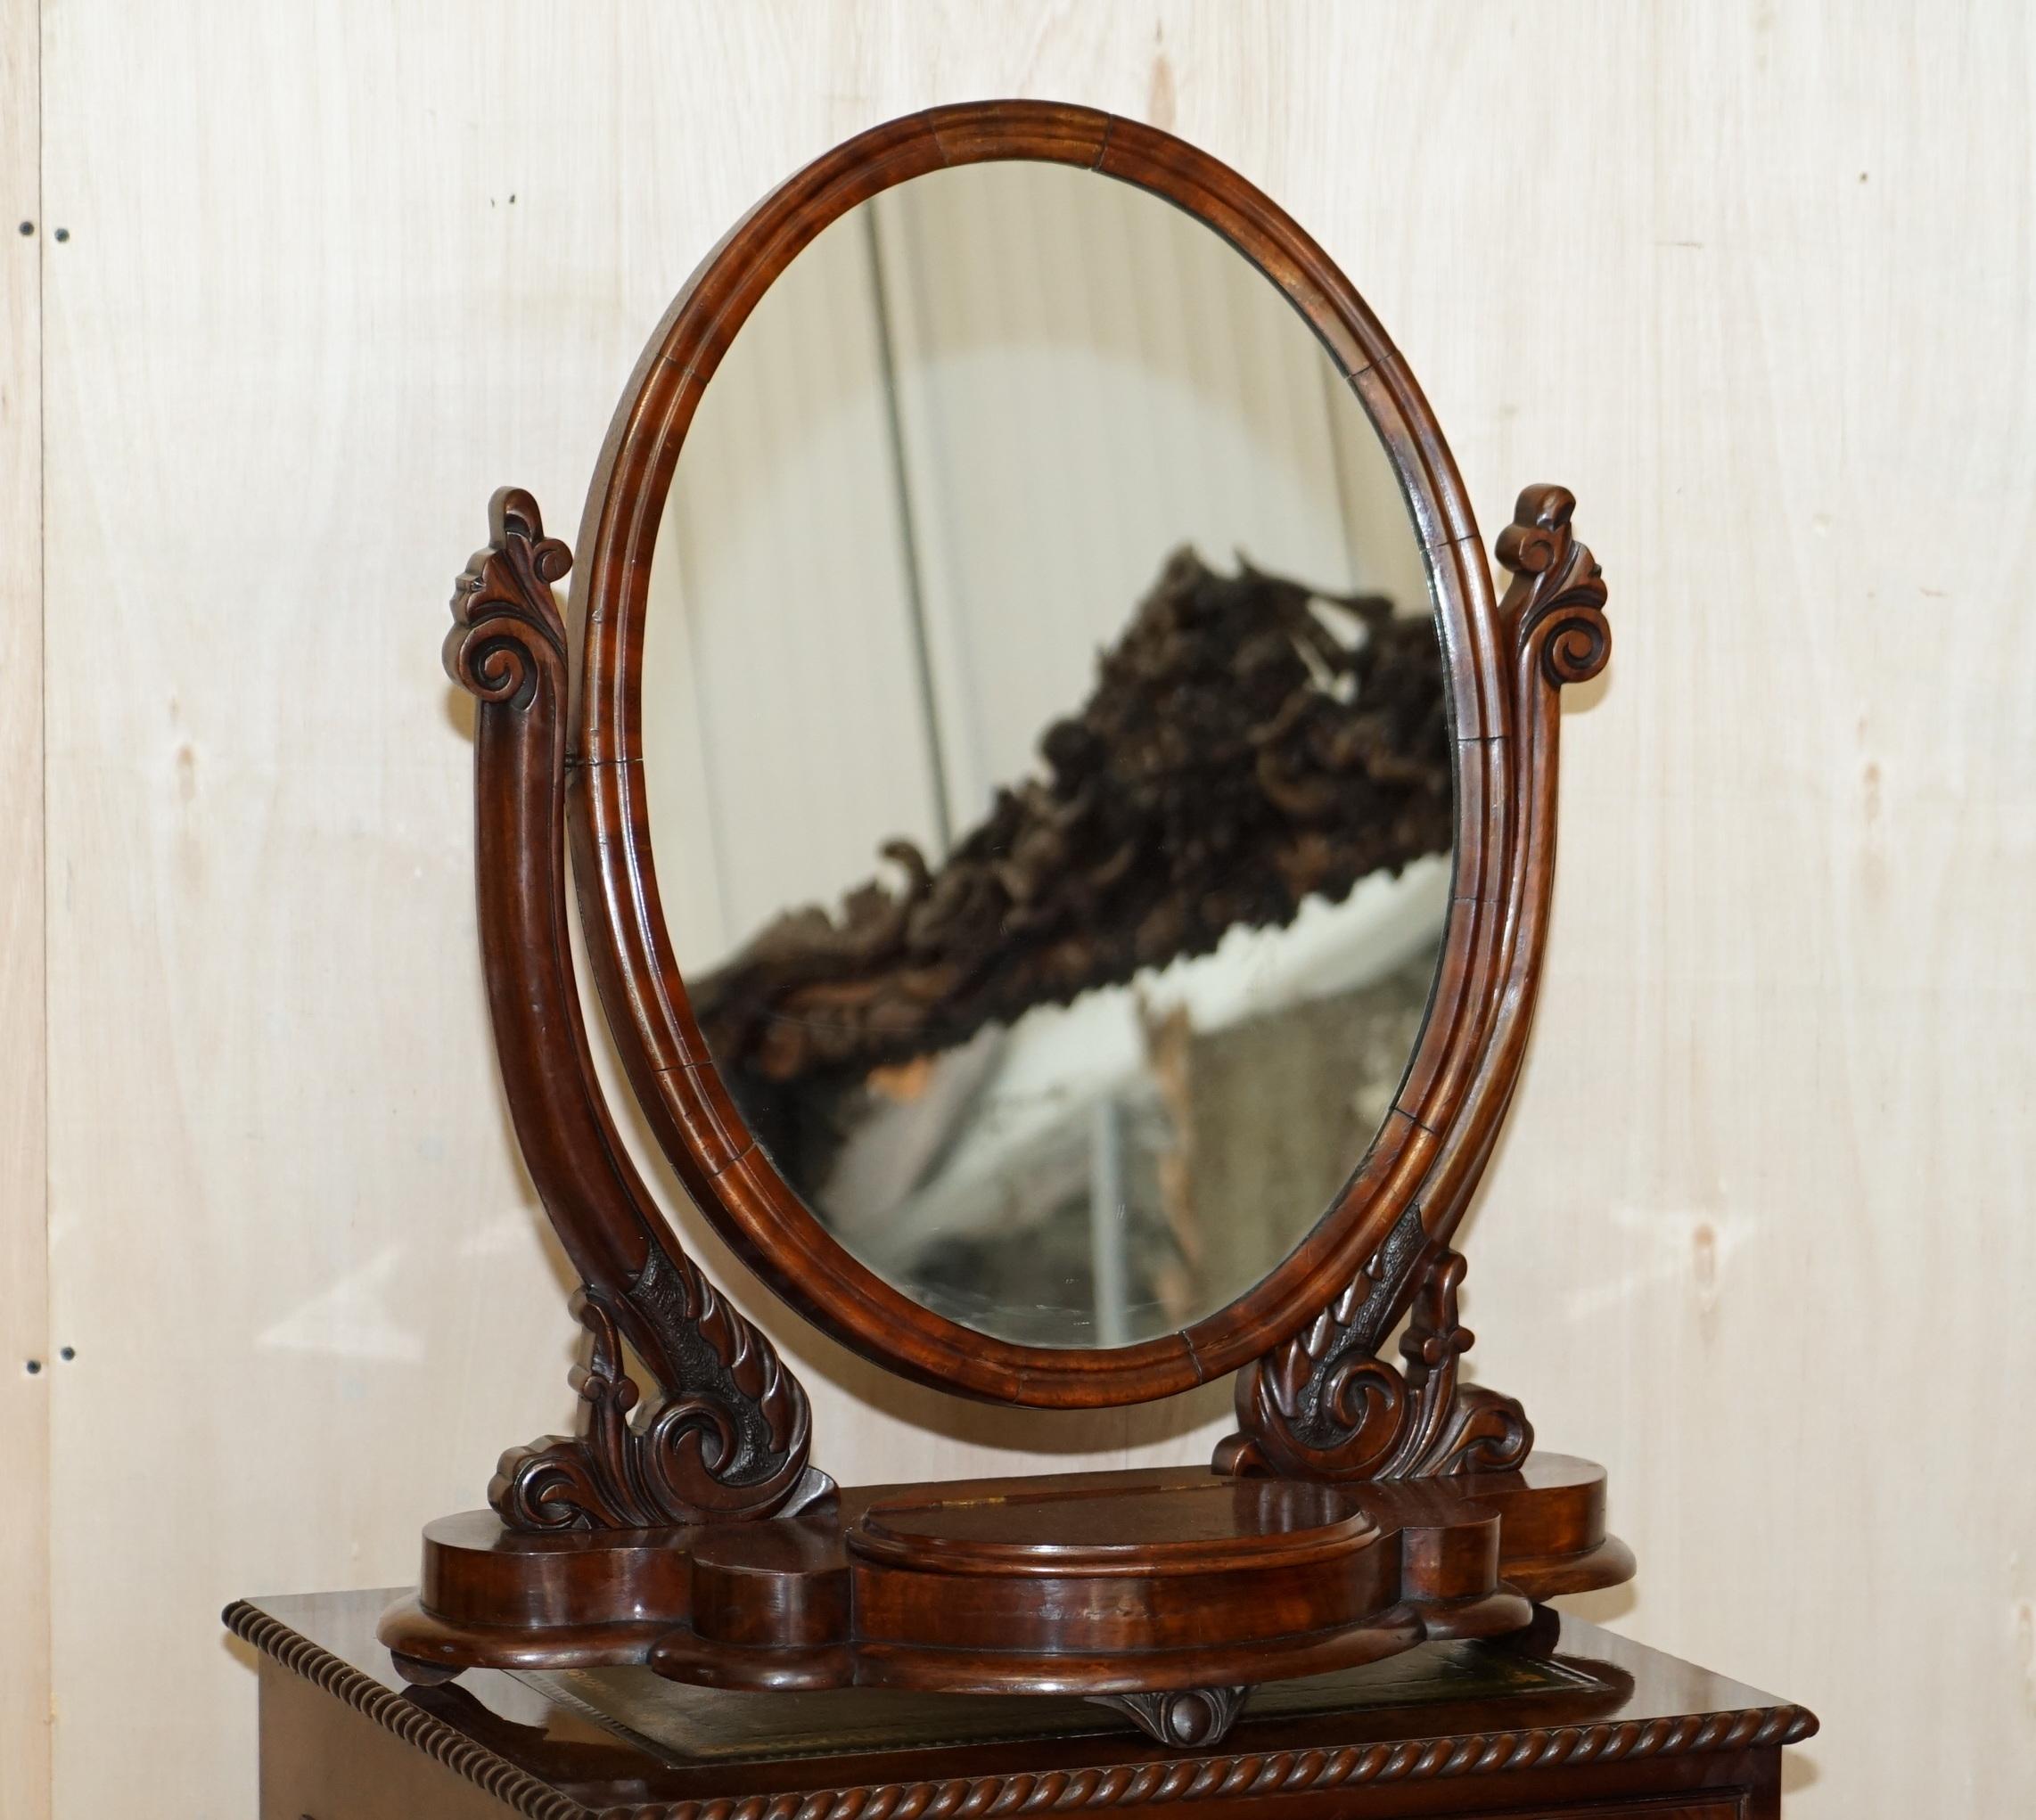 We are delighted to offer this very fine, large table top Cheval mirror in flamed mahogany circa 1860-1880

A very good looking and well made piece, the timber patina is glorious, the mirror has a little jewellery box in the middle which is baize